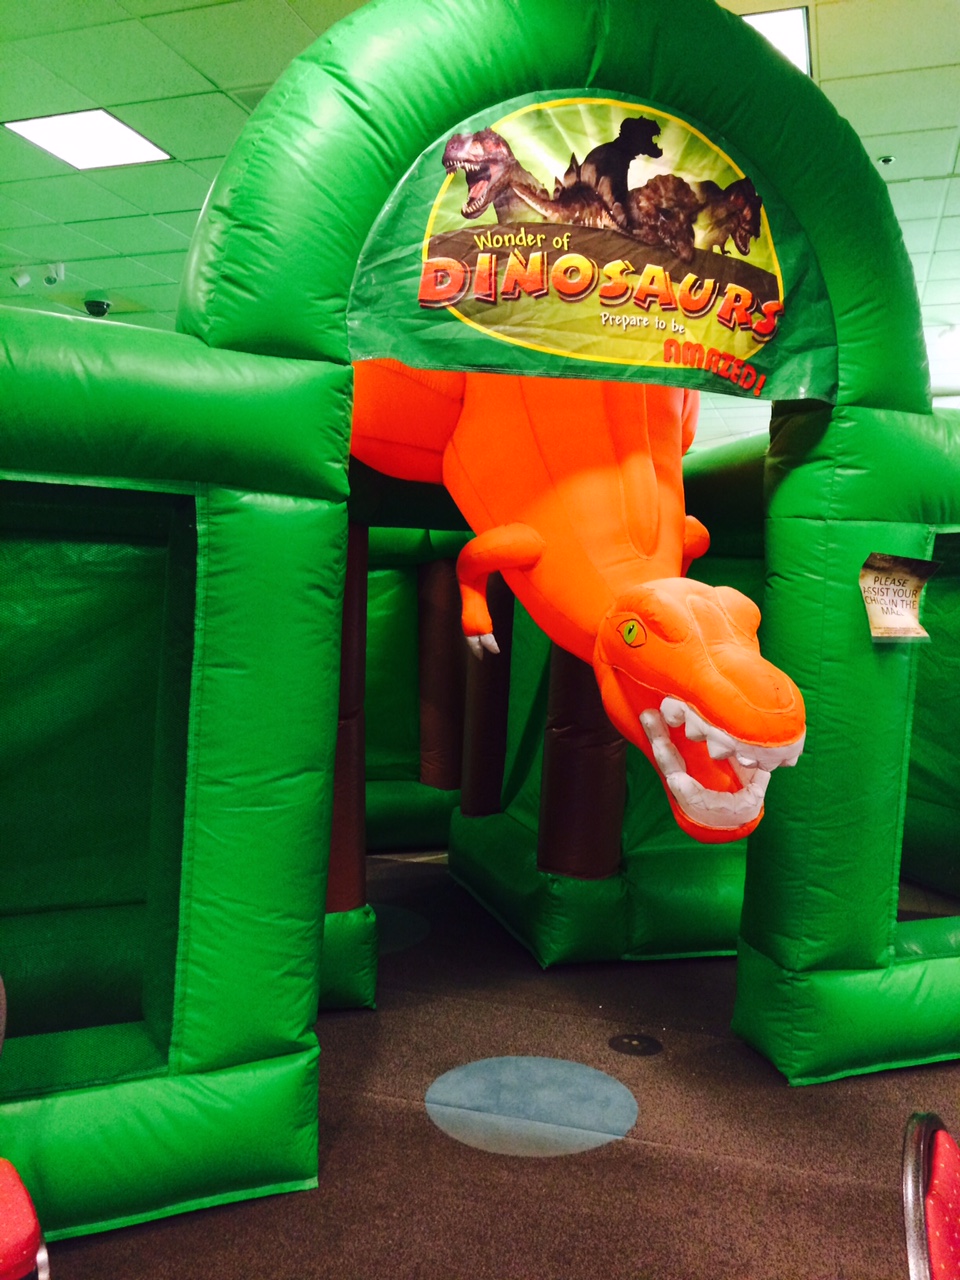 Wonder of Dinosaurs Coupons near me in Redondo Beach, CA 90278 | 8coupons